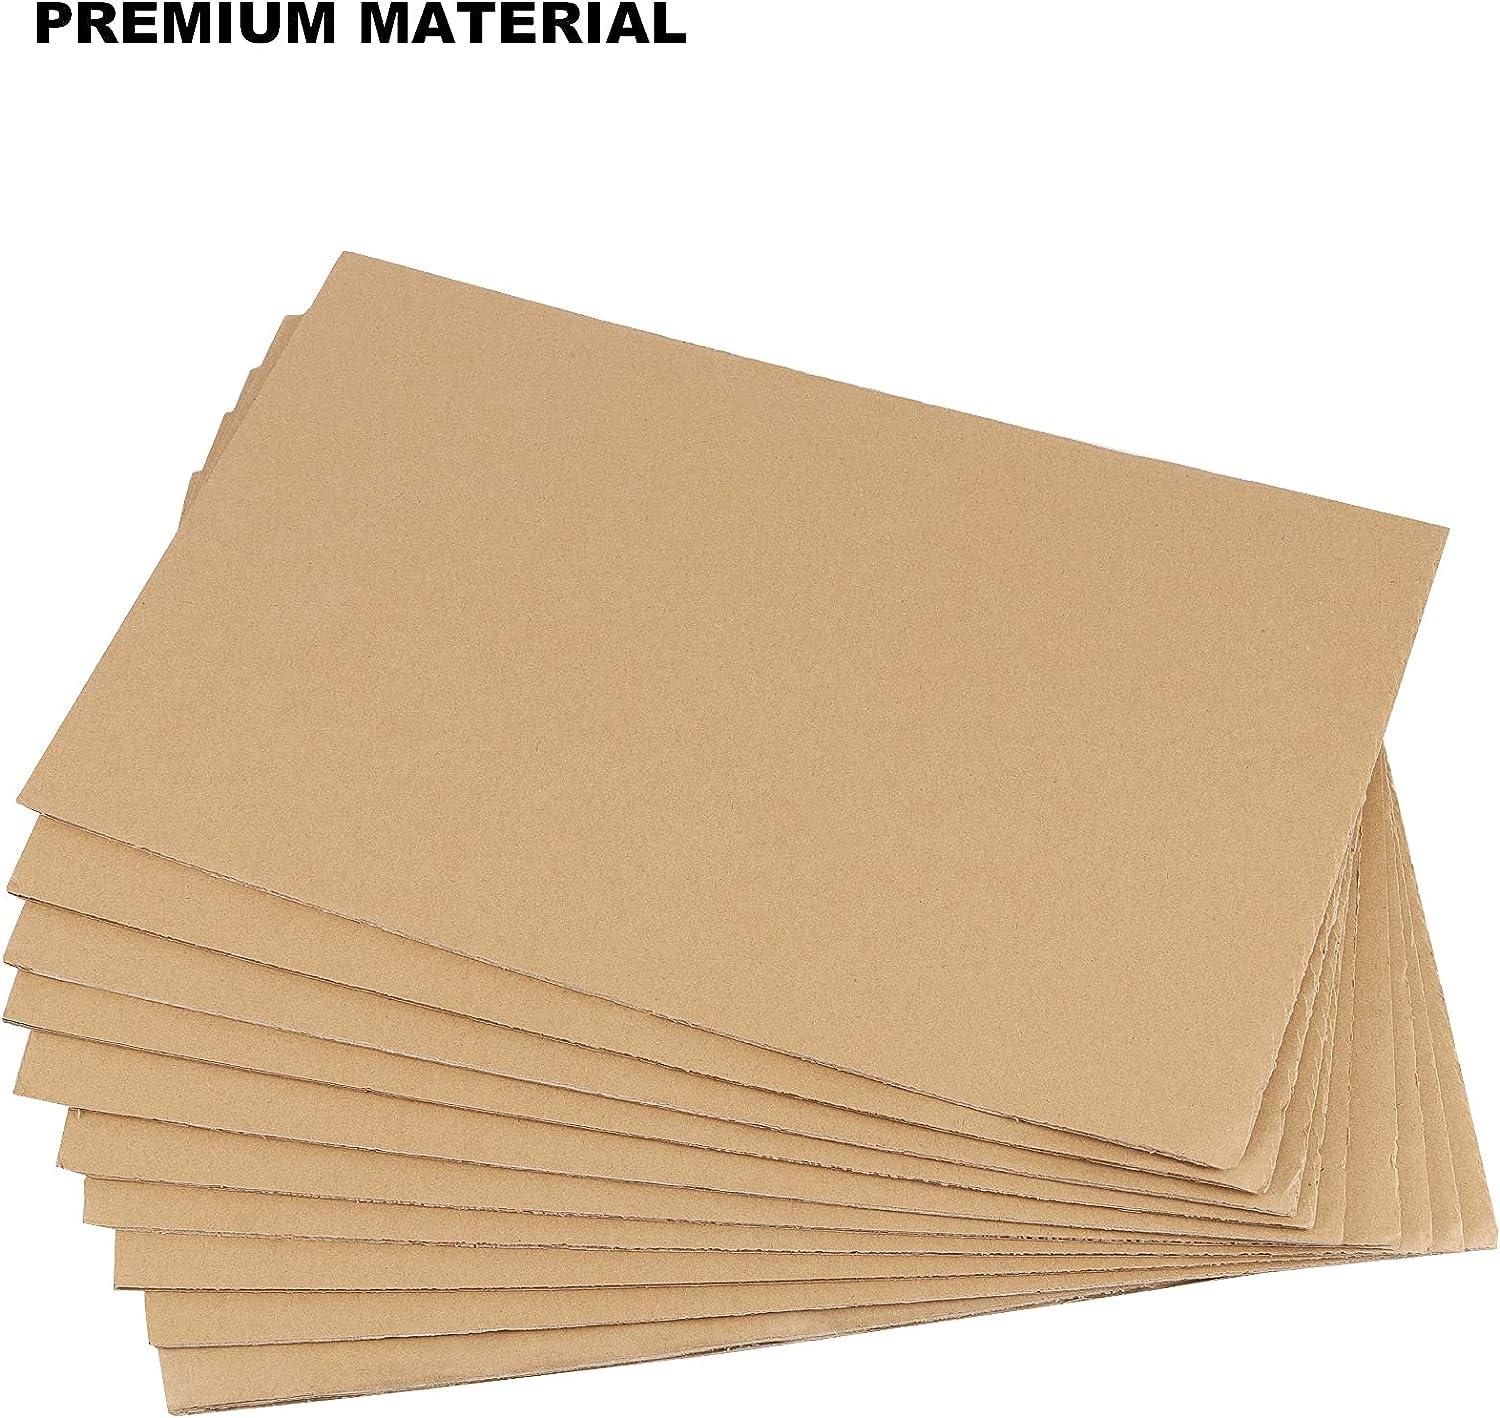 SHEUTSAN 100 Pack 8.5 x 11 Inches Chipboard Sheets,Medium Weight 50 Point  Chipboard, Brown Recyclable Corrugated Cardboard Pads for Albums Cover,  Scrapbooking, Documents Prints Backing